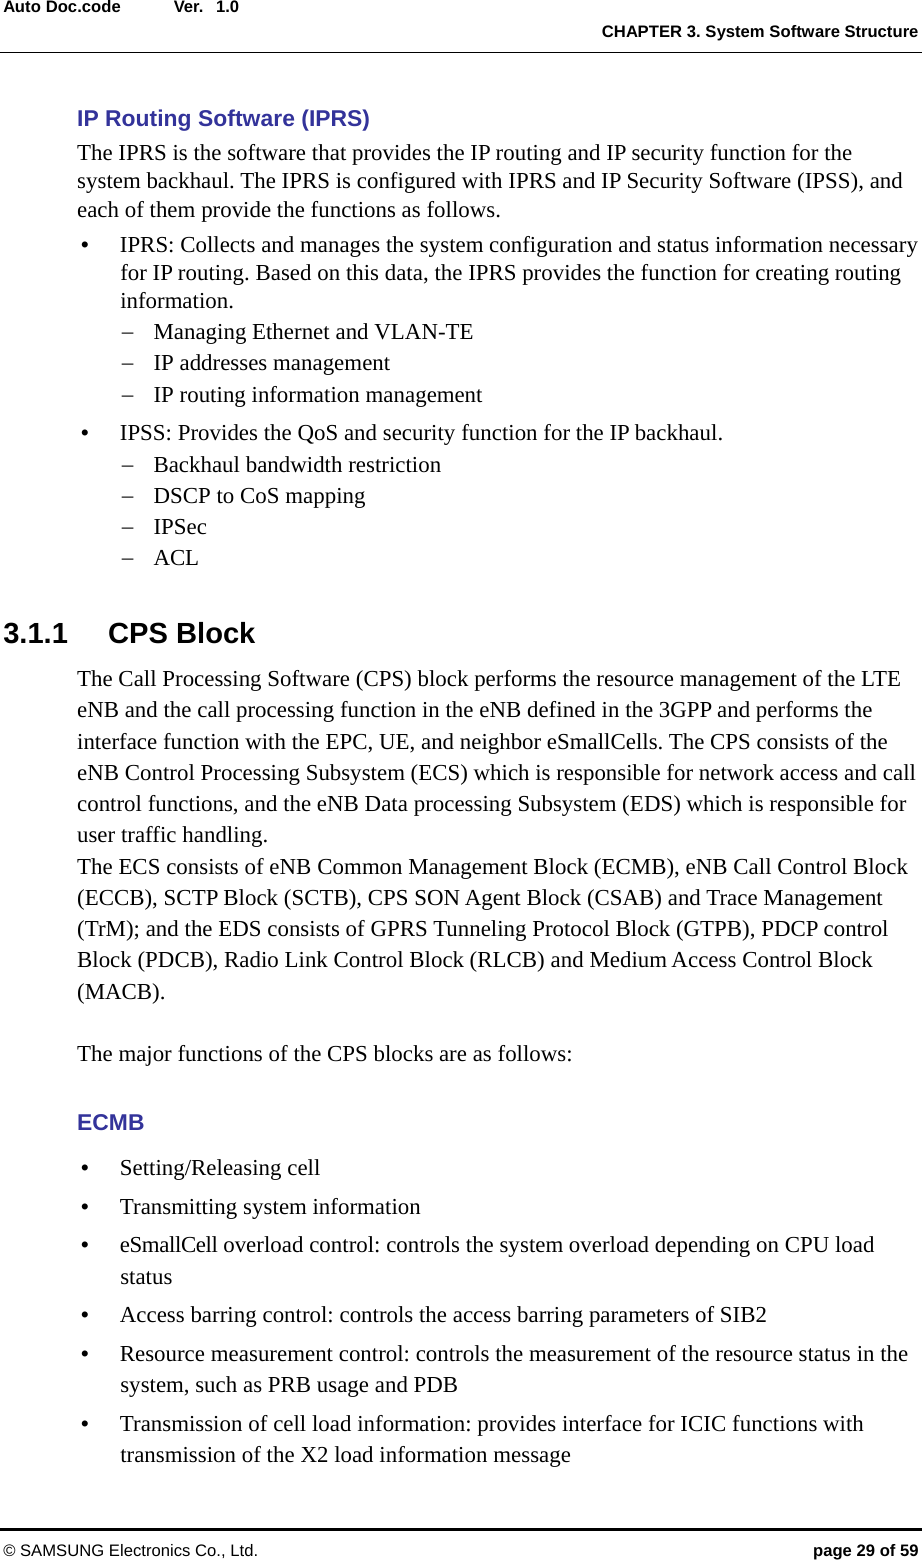  Ver.  CHAPTER 3. System Software Structure © SAMSUNG Electronics Co., Ltd.  page 29 of 59 Auto Doc.code  1.0 IP Routing Software (IPRS) The IPRS is the software that provides the IP routing and IP security function for the system backhaul. The IPRS is configured with IPRS and IP Security Software (IPSS), and each of them provide the functions as follows. y IPRS: Collects and manages the system configuration and status information necessary for IP routing. Based on this data, the IPRS provides the function for creating routing information. − Managing Ethernet and VLAN-TE − IP addresses management − IP routing information management y IPSS: Provides the QoS and security function for the IP backhaul. − Backhaul bandwidth restriction − DSCP to CoS mapping − IPSec − ACL  3.1.1 CPS Block The Call Processing Software (CPS) block performs the resource management of the LTE eNB and the call processing function in the eNB defined in the 3GPP and performs the interface function with the EPC, UE, and neighbor eSmallCells. The CPS consists of the eNB Control Processing Subsystem (ECS) which is responsible for network access and call control functions, and the eNB Data processing Subsystem (EDS) which is responsible for user traffic handling.   The ECS consists of eNB Common Management Block (ECMB), eNB Call Control Block (ECCB), SCTP Block (SCTB), CPS SON Agent Block (CSAB) and Trace Management (TrM); and the EDS consists of GPRS Tunneling Protocol Block (GTPB), PDCP control Block (PDCB), Radio Link Control Block (RLCB) and Medium Access Control Block (MACB).   The major functions of the CPS blocks are as follows:  ECMB y Setting/Releasing cell y Transmitting system information y eSmallCell overload control: controls the system overload depending on CPU load status y Access barring control: controls the access barring parameters of SIB2 y Resource measurement control: controls the measurement of the resource status in the system, such as PRB usage and PDB y Transmission of cell load information: provides interface for ICIC functions with transmission of the X2 load information message 